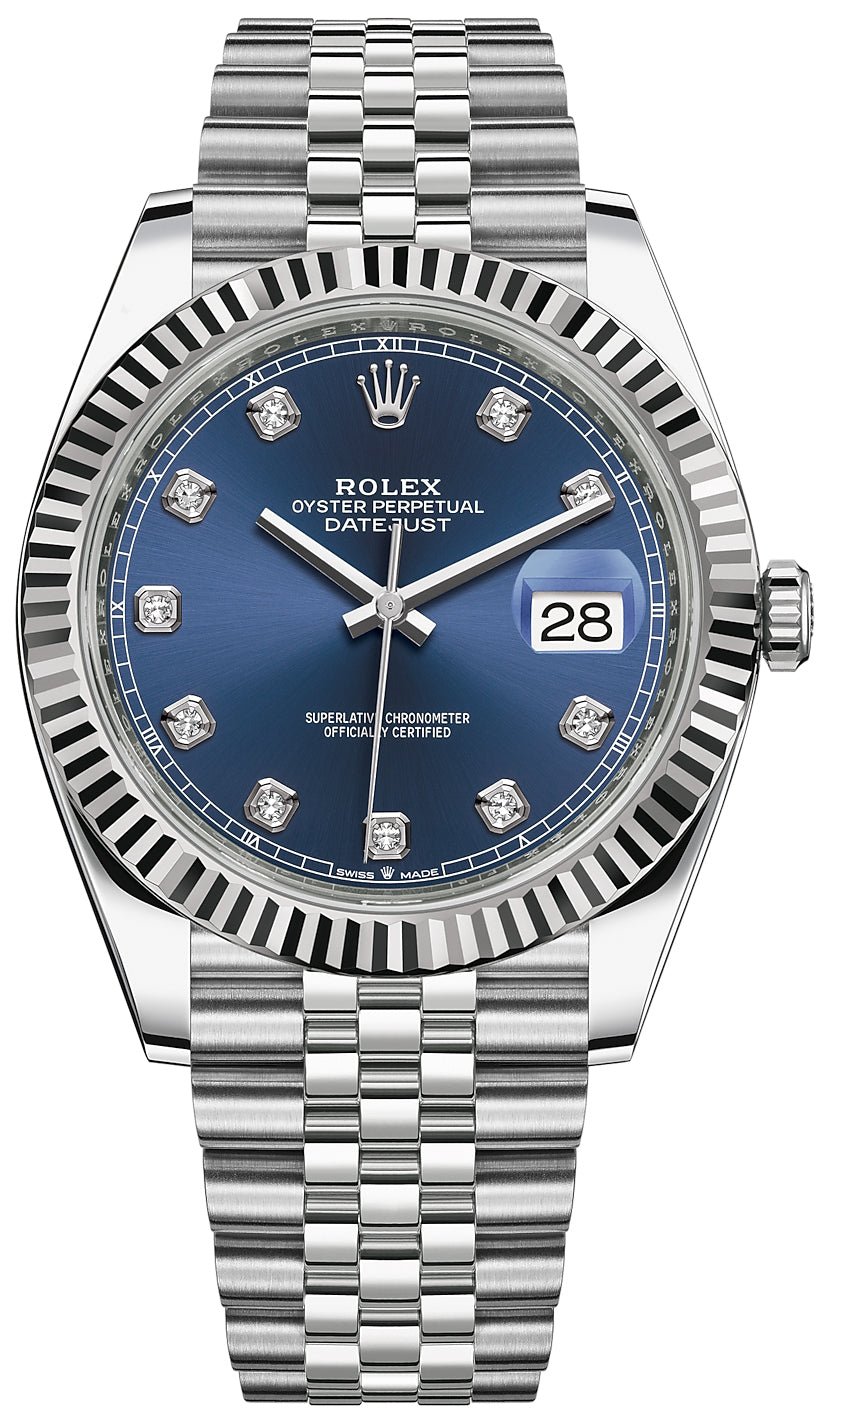 Rolex Datejust 41 Two-Tone Stainless Steel and Gold Bezel / – WatchesOff5th